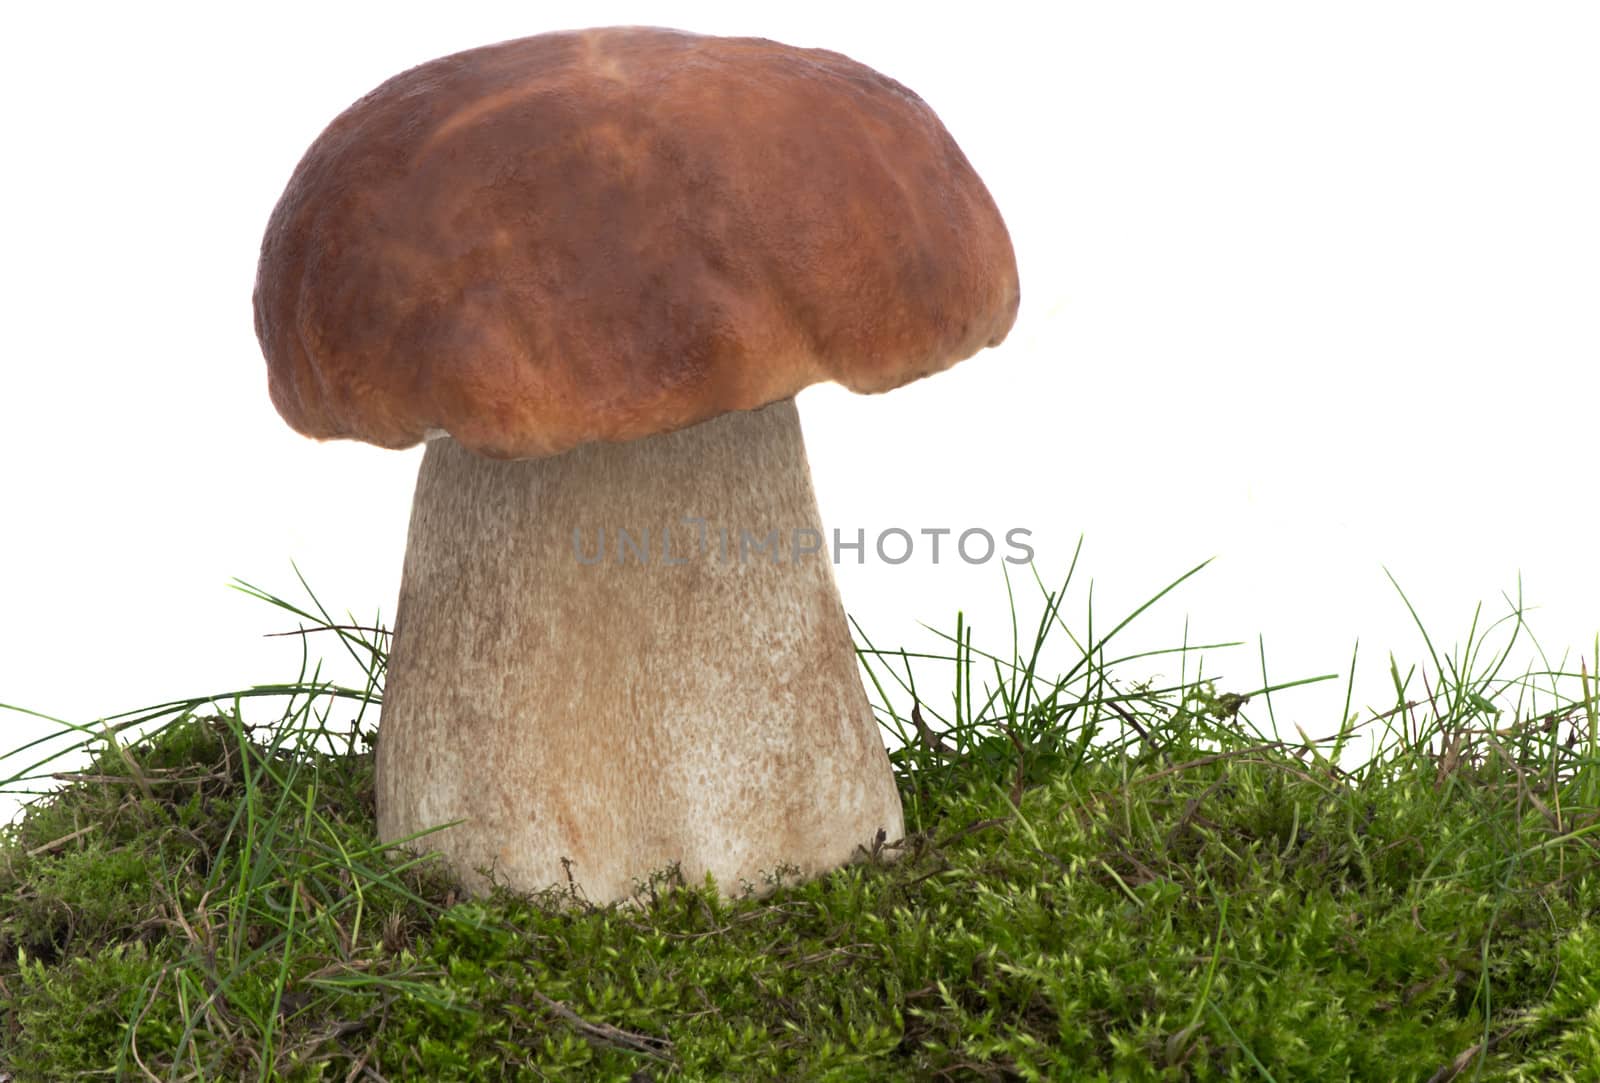 One big beautiful white fungus on the green grass. Presented on a white background